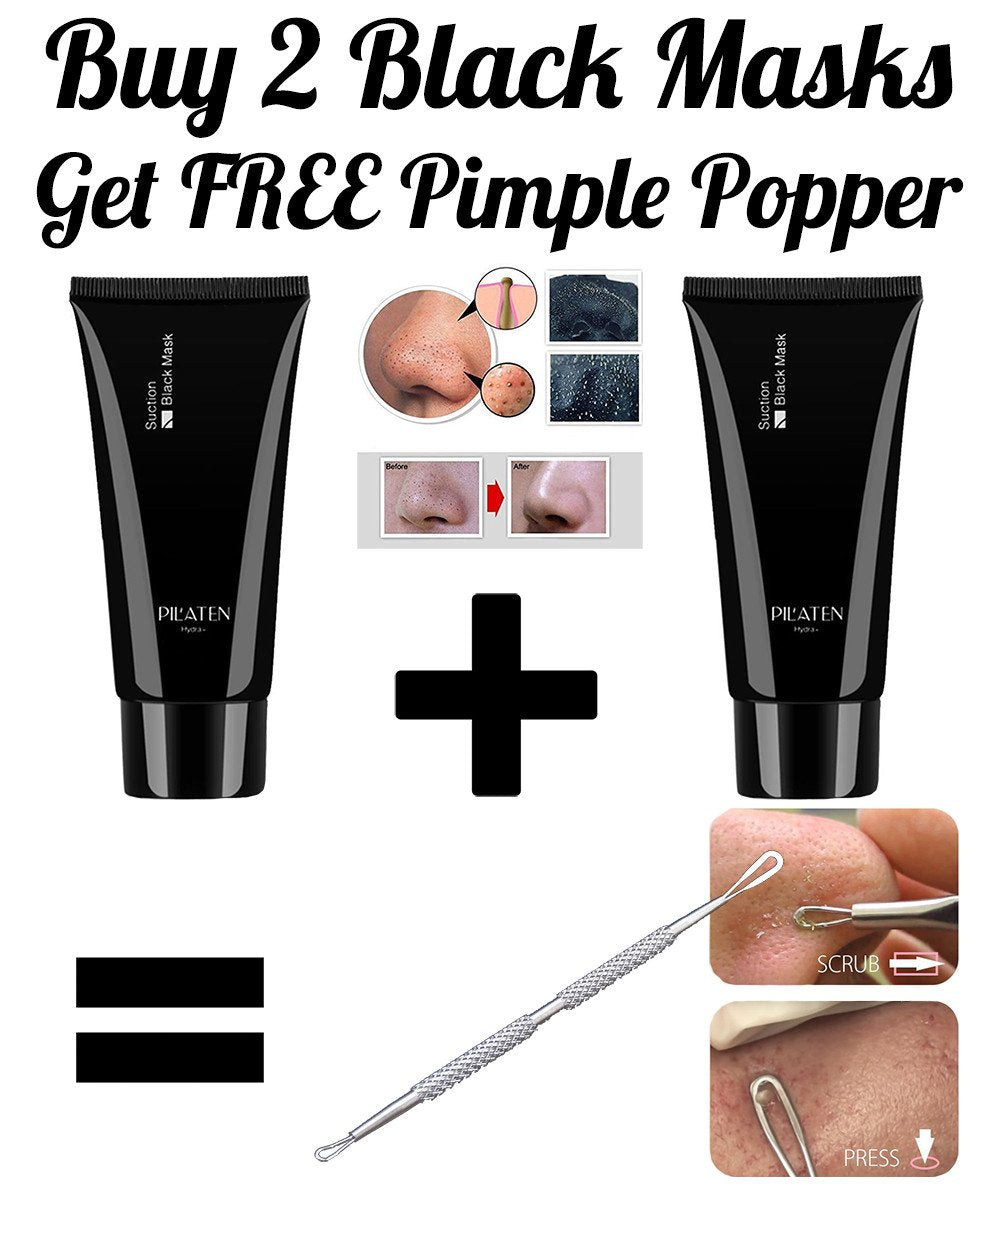 Black Mask Special (Buy 2 Get FREE Pimple Tool) - Barber Clips